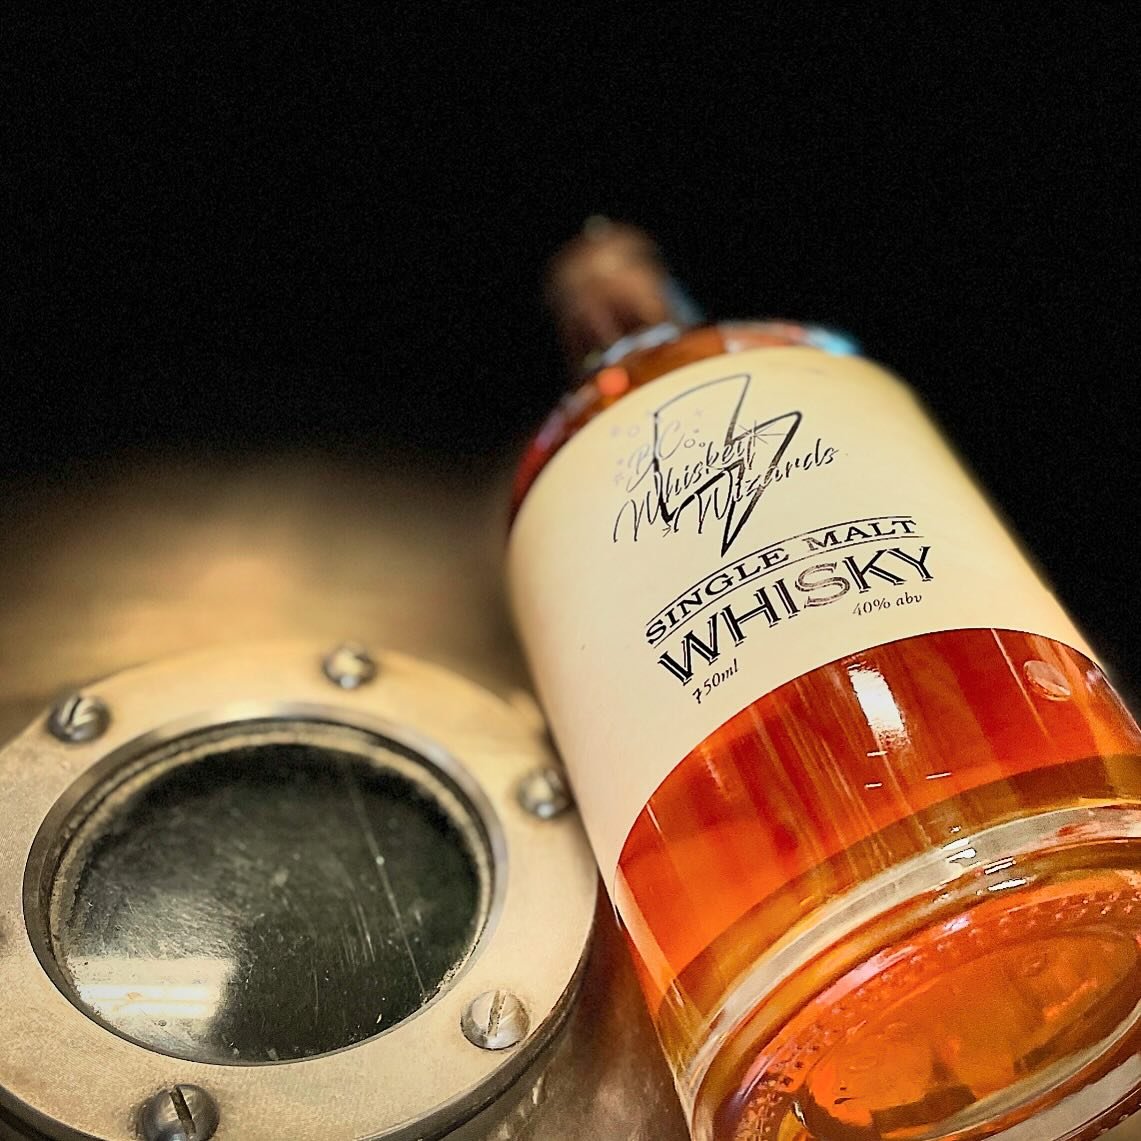 Did you know you can buy your own barrel for custom private labelling? We created a fundraiser bottle for the @bcwhiskeywizards and wow is it delicious 🤤 smooth and clean single barrel single malt whisky. 

#bcwhiskeywizards #bcwhisky #whiskylover #